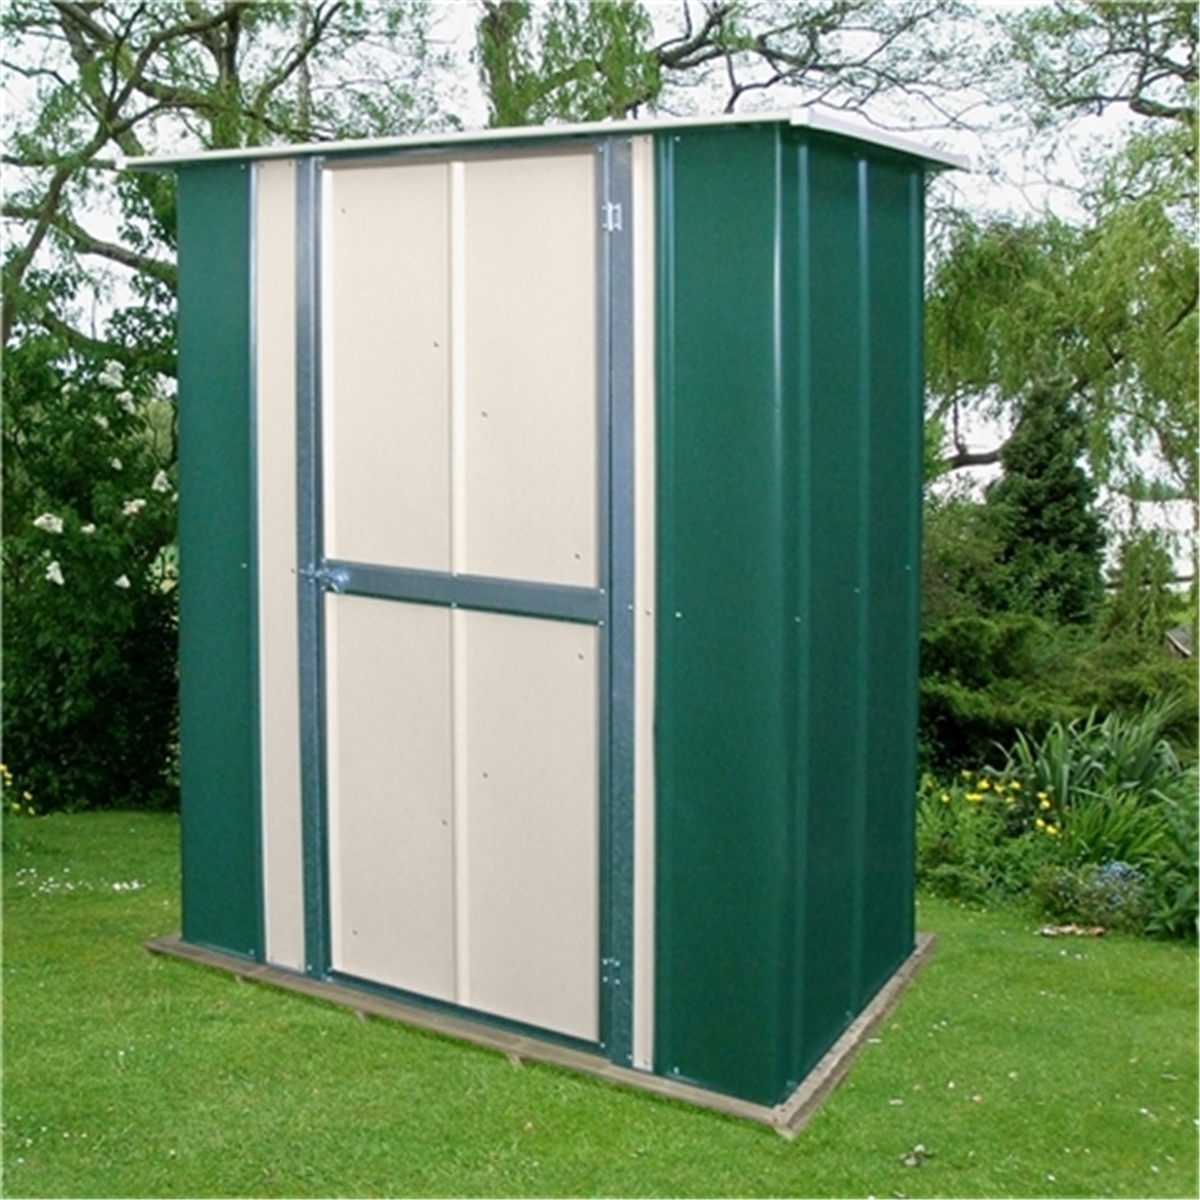  OUT OF STOCK** 5 x 3 Deluxe Utility Metal Shed (1.58m x 0.92m